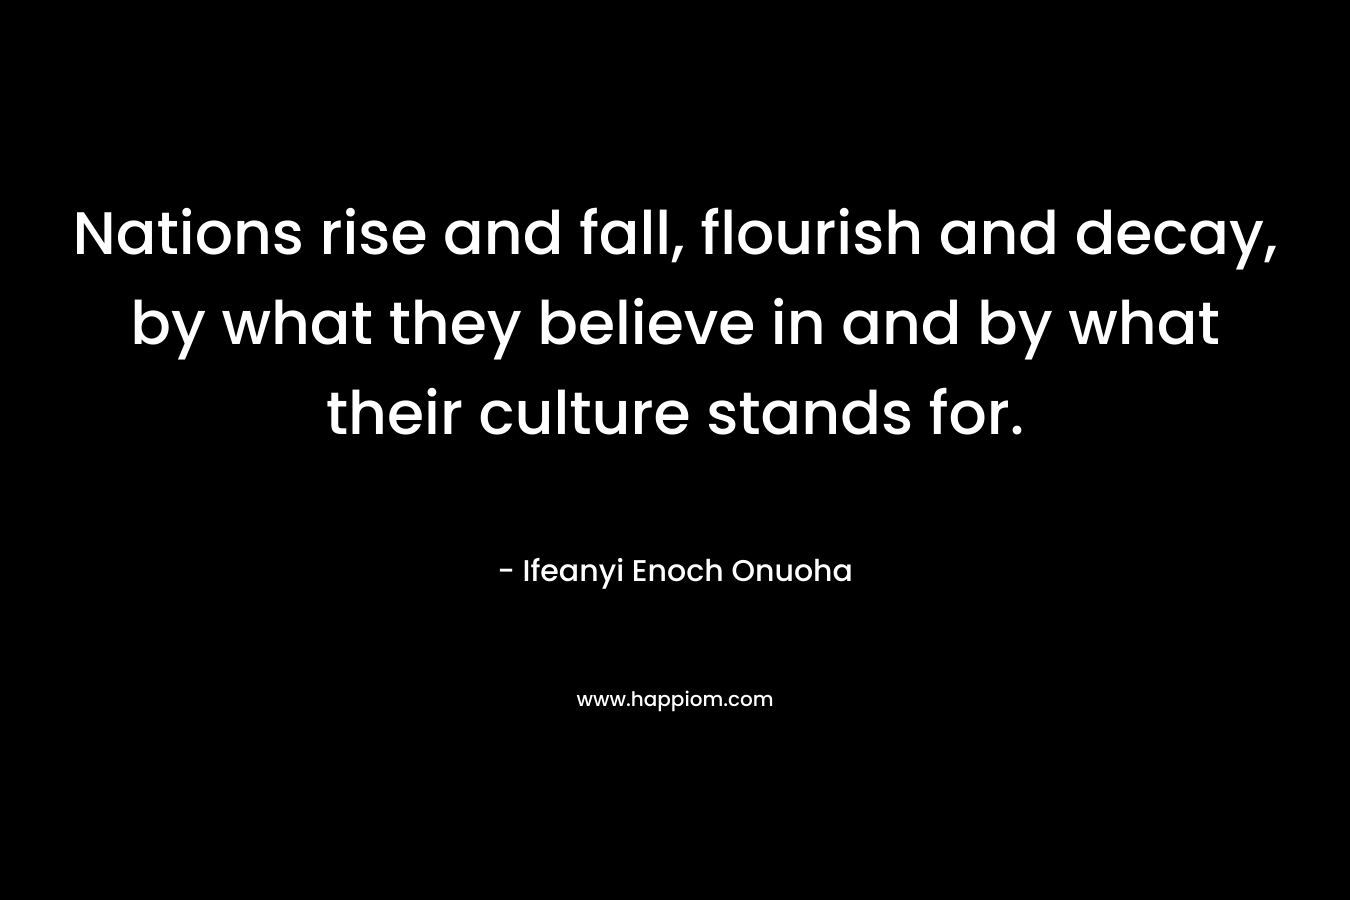 Nations rise and fall, flourish and decay, by what they believe in and by what their culture stands for.